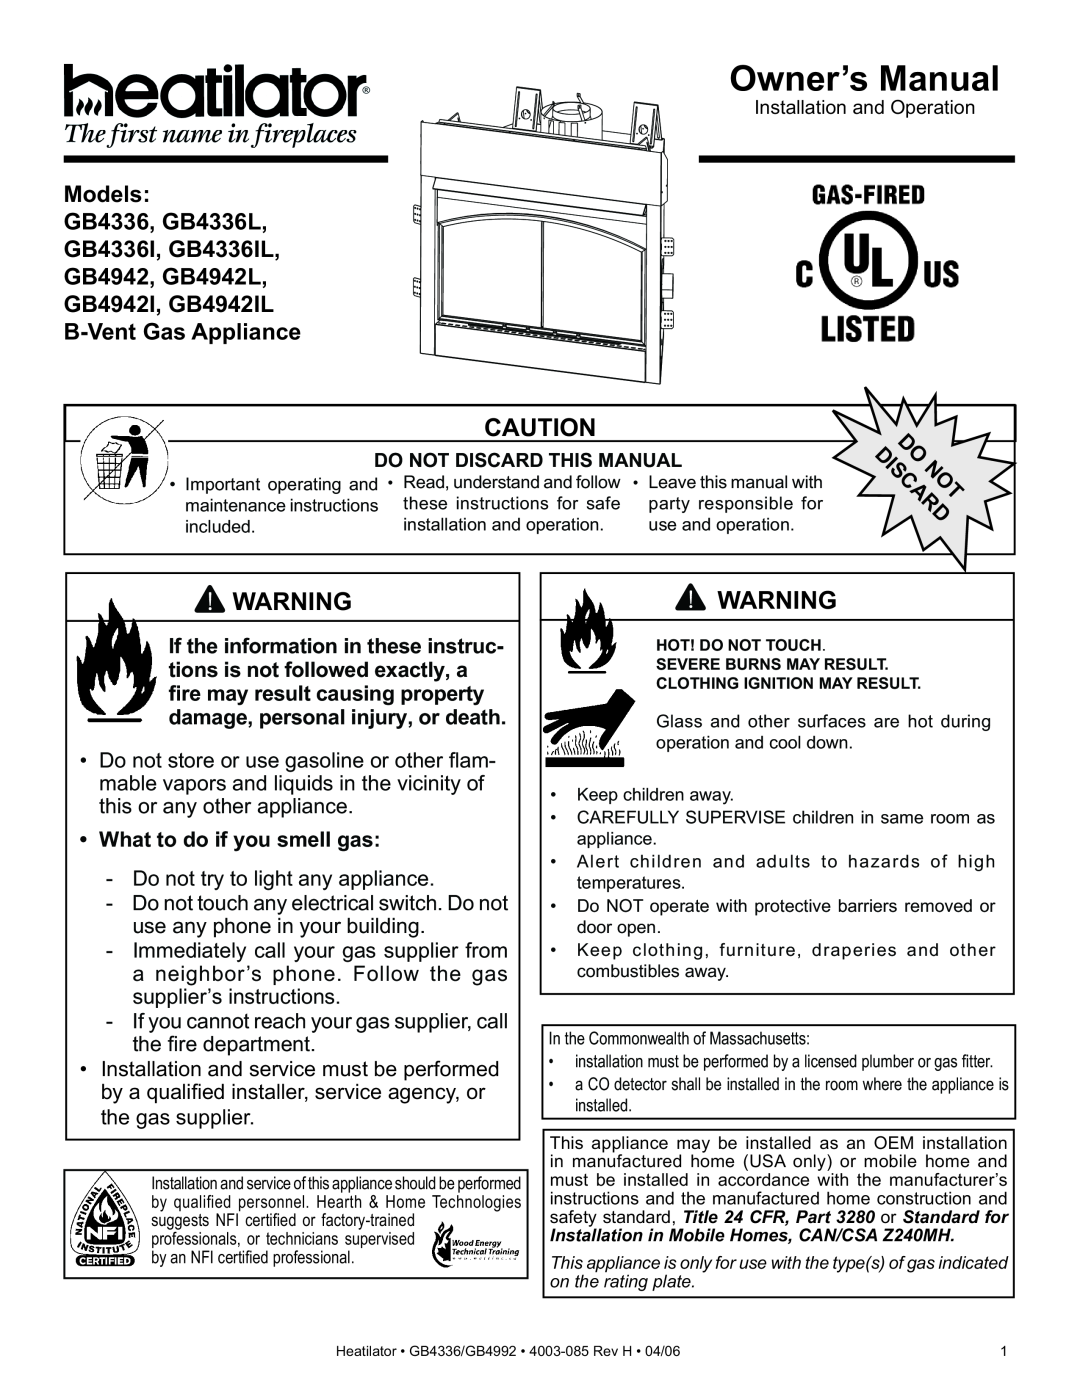 Heatiator owner manual What to do if you smell gas, Models GB4336, GB4336L GB4336I, GB4336IL, B-VentGas Appliance 